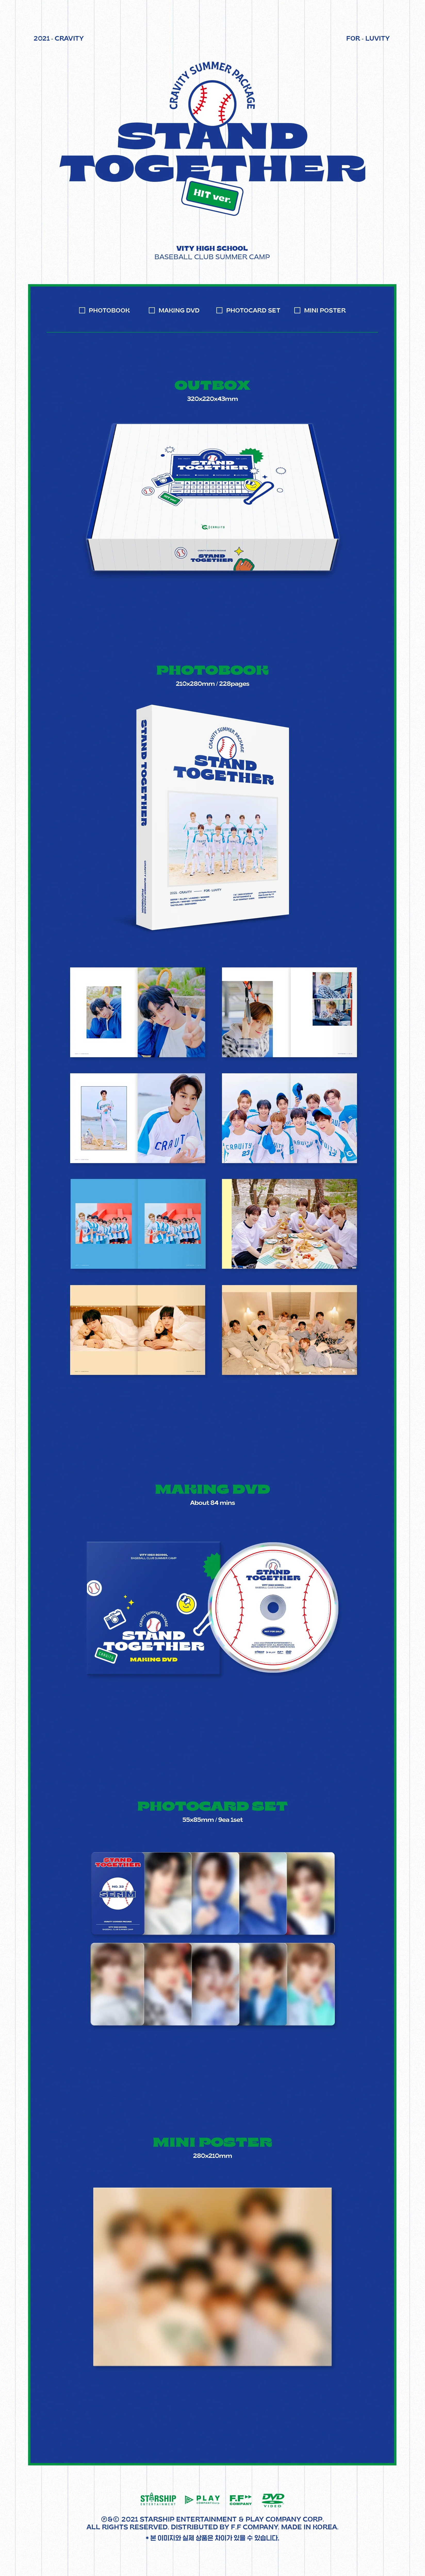 CRAVITY Summer Package 2021 Stand Together Hit Version